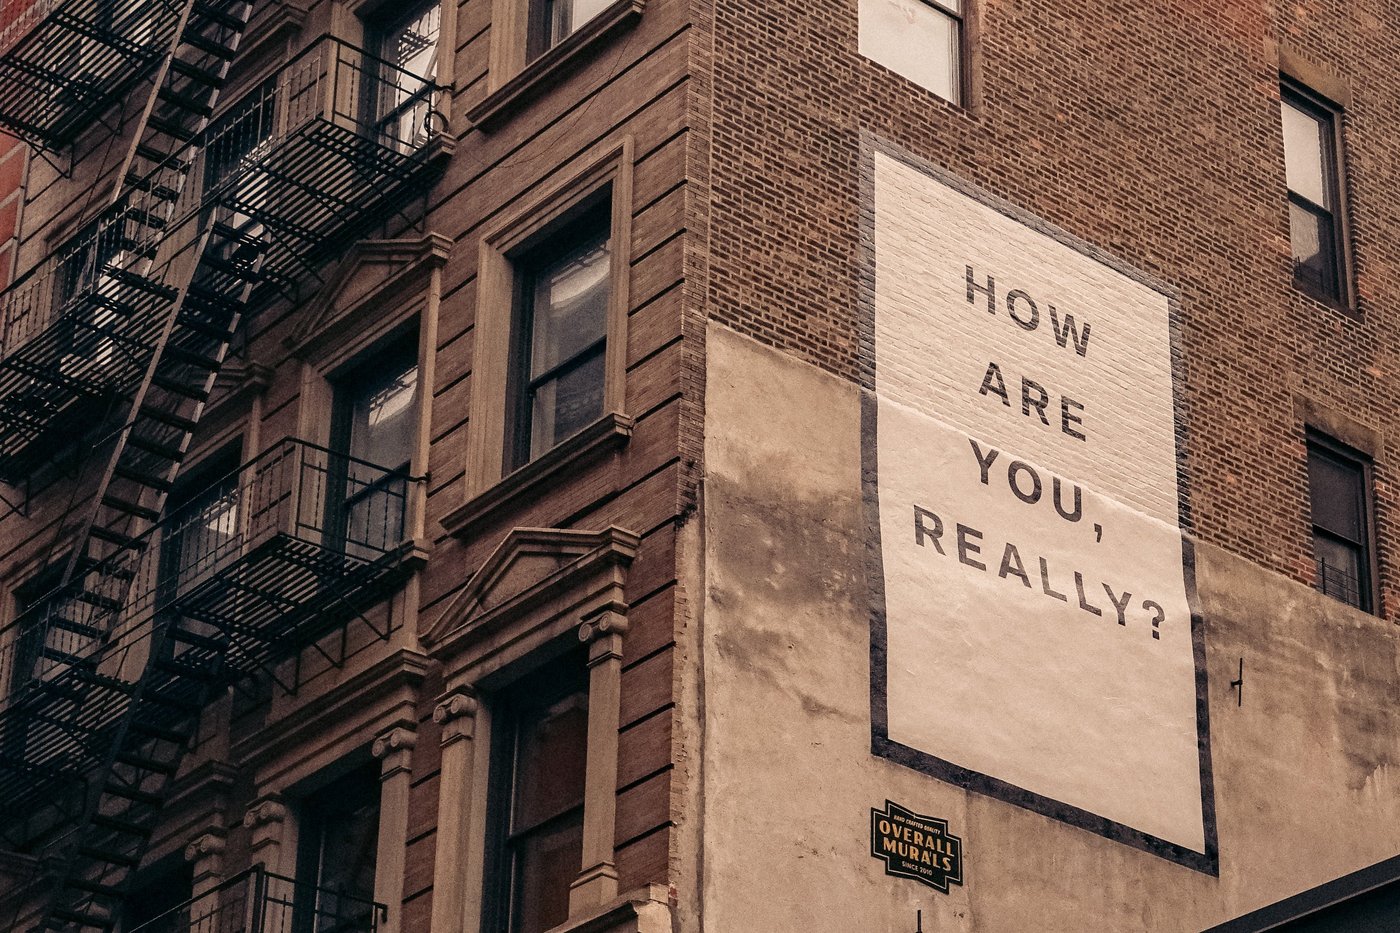 A brick building with a big sign reading "How are you, really?"